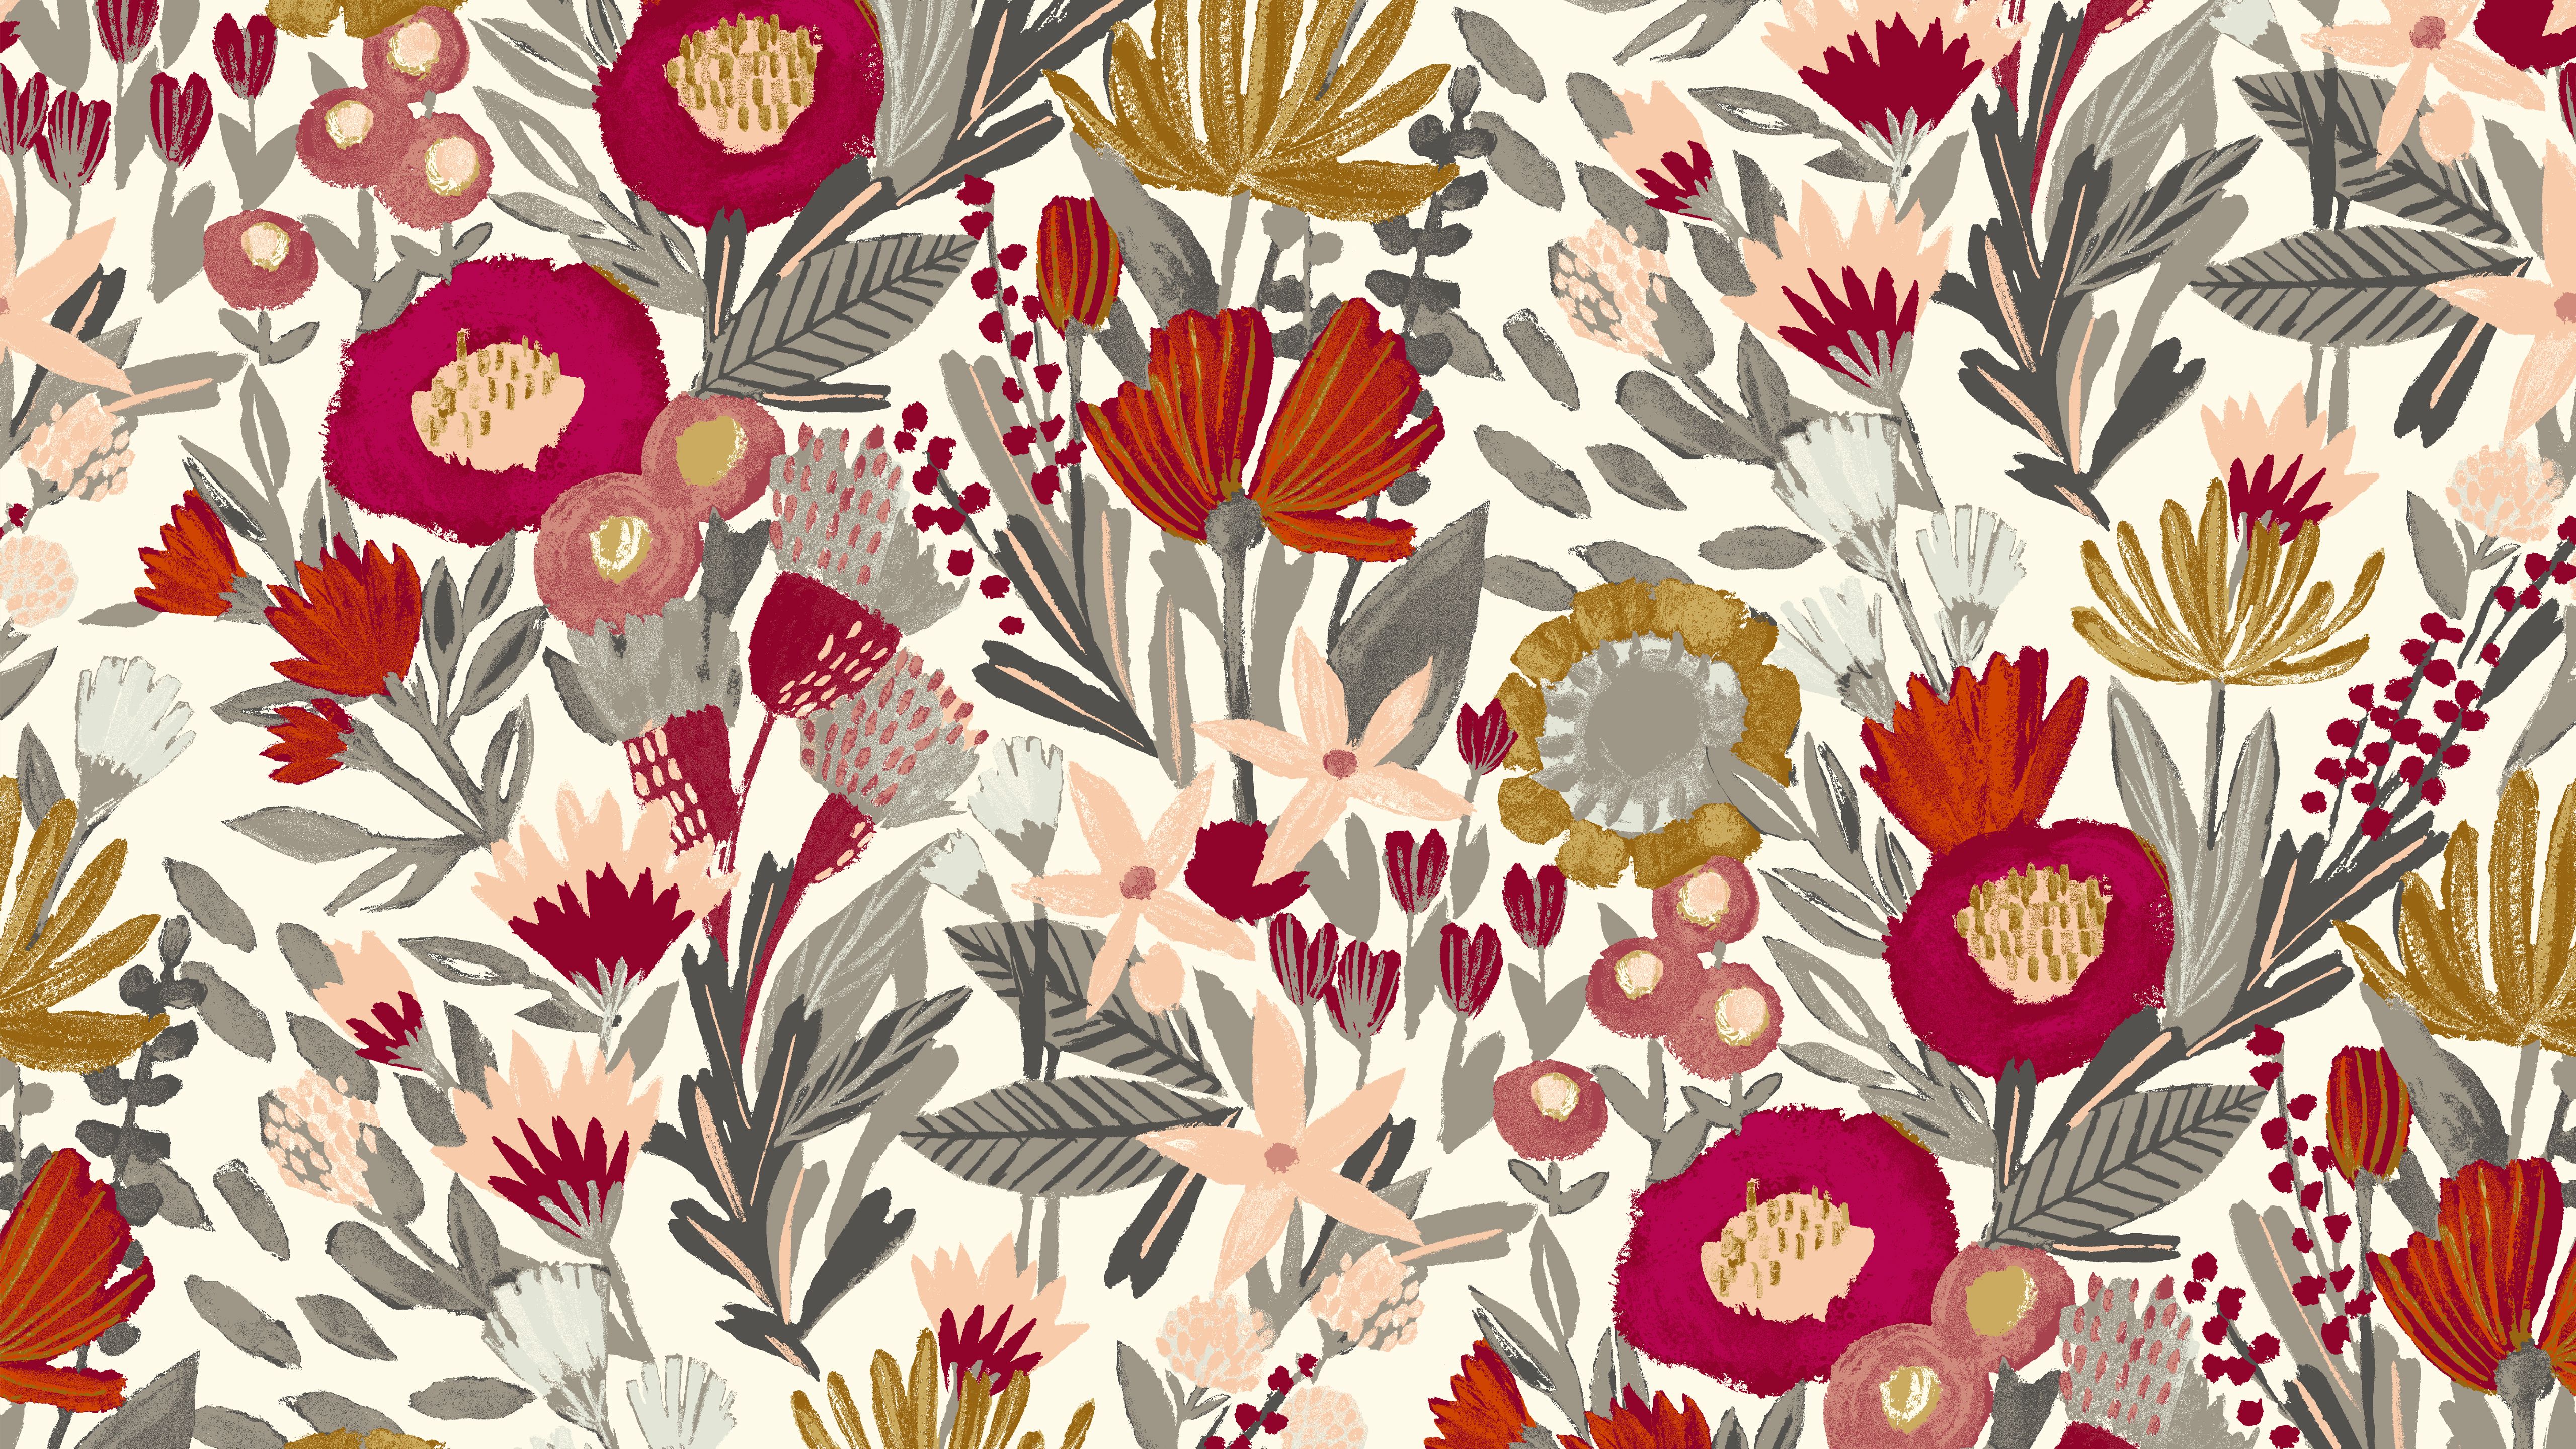 Free download Floral Pattern Desktop Wallpapers Download at WallpaperBro [5120x2880] for your